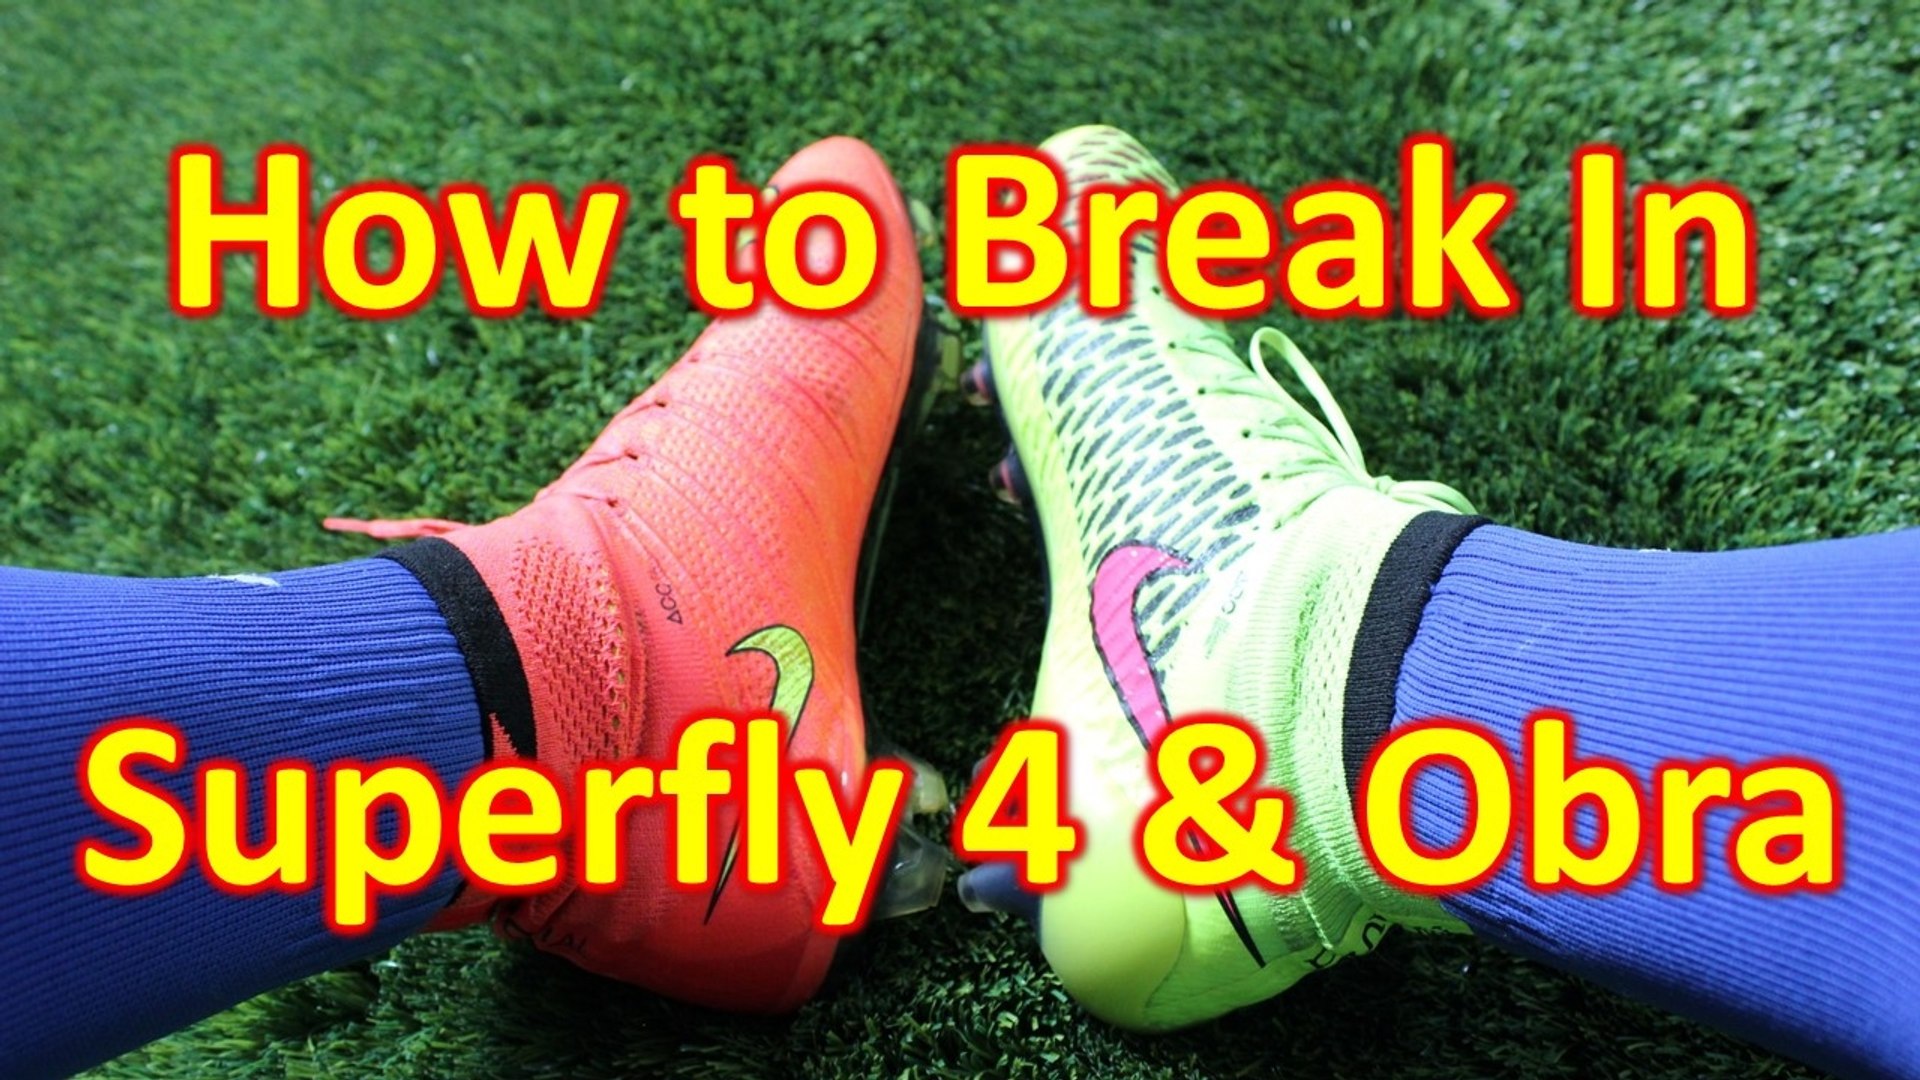 How to Break in the Nike Mercurial Superfly & Magista Obra - video  Dailymotion